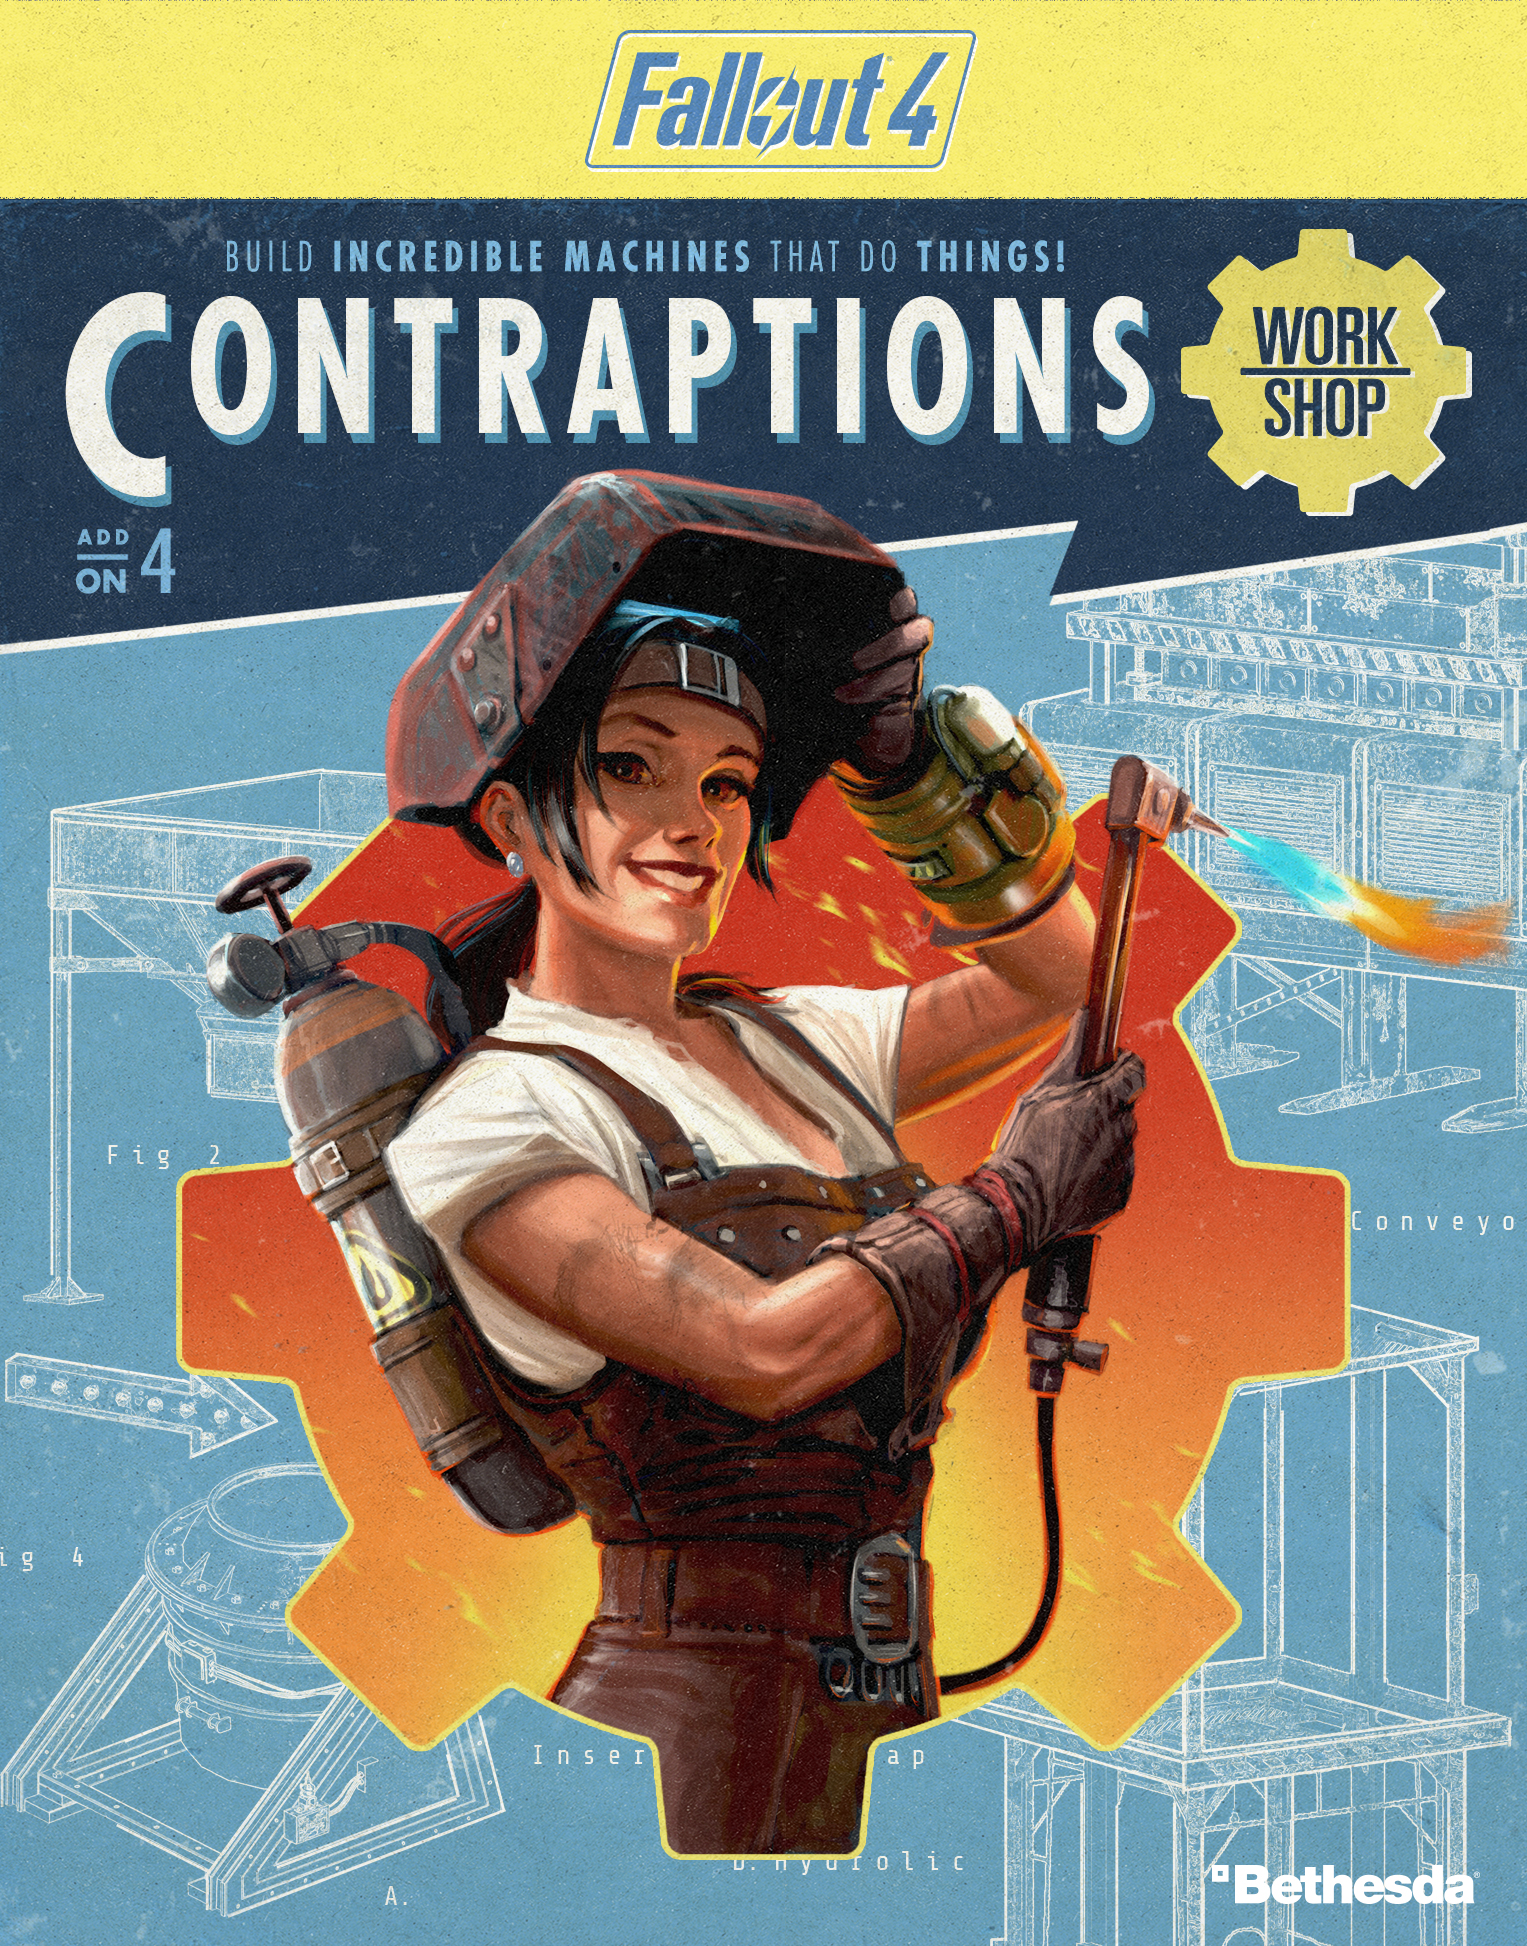 FO4_Contraptions_Full.jpg